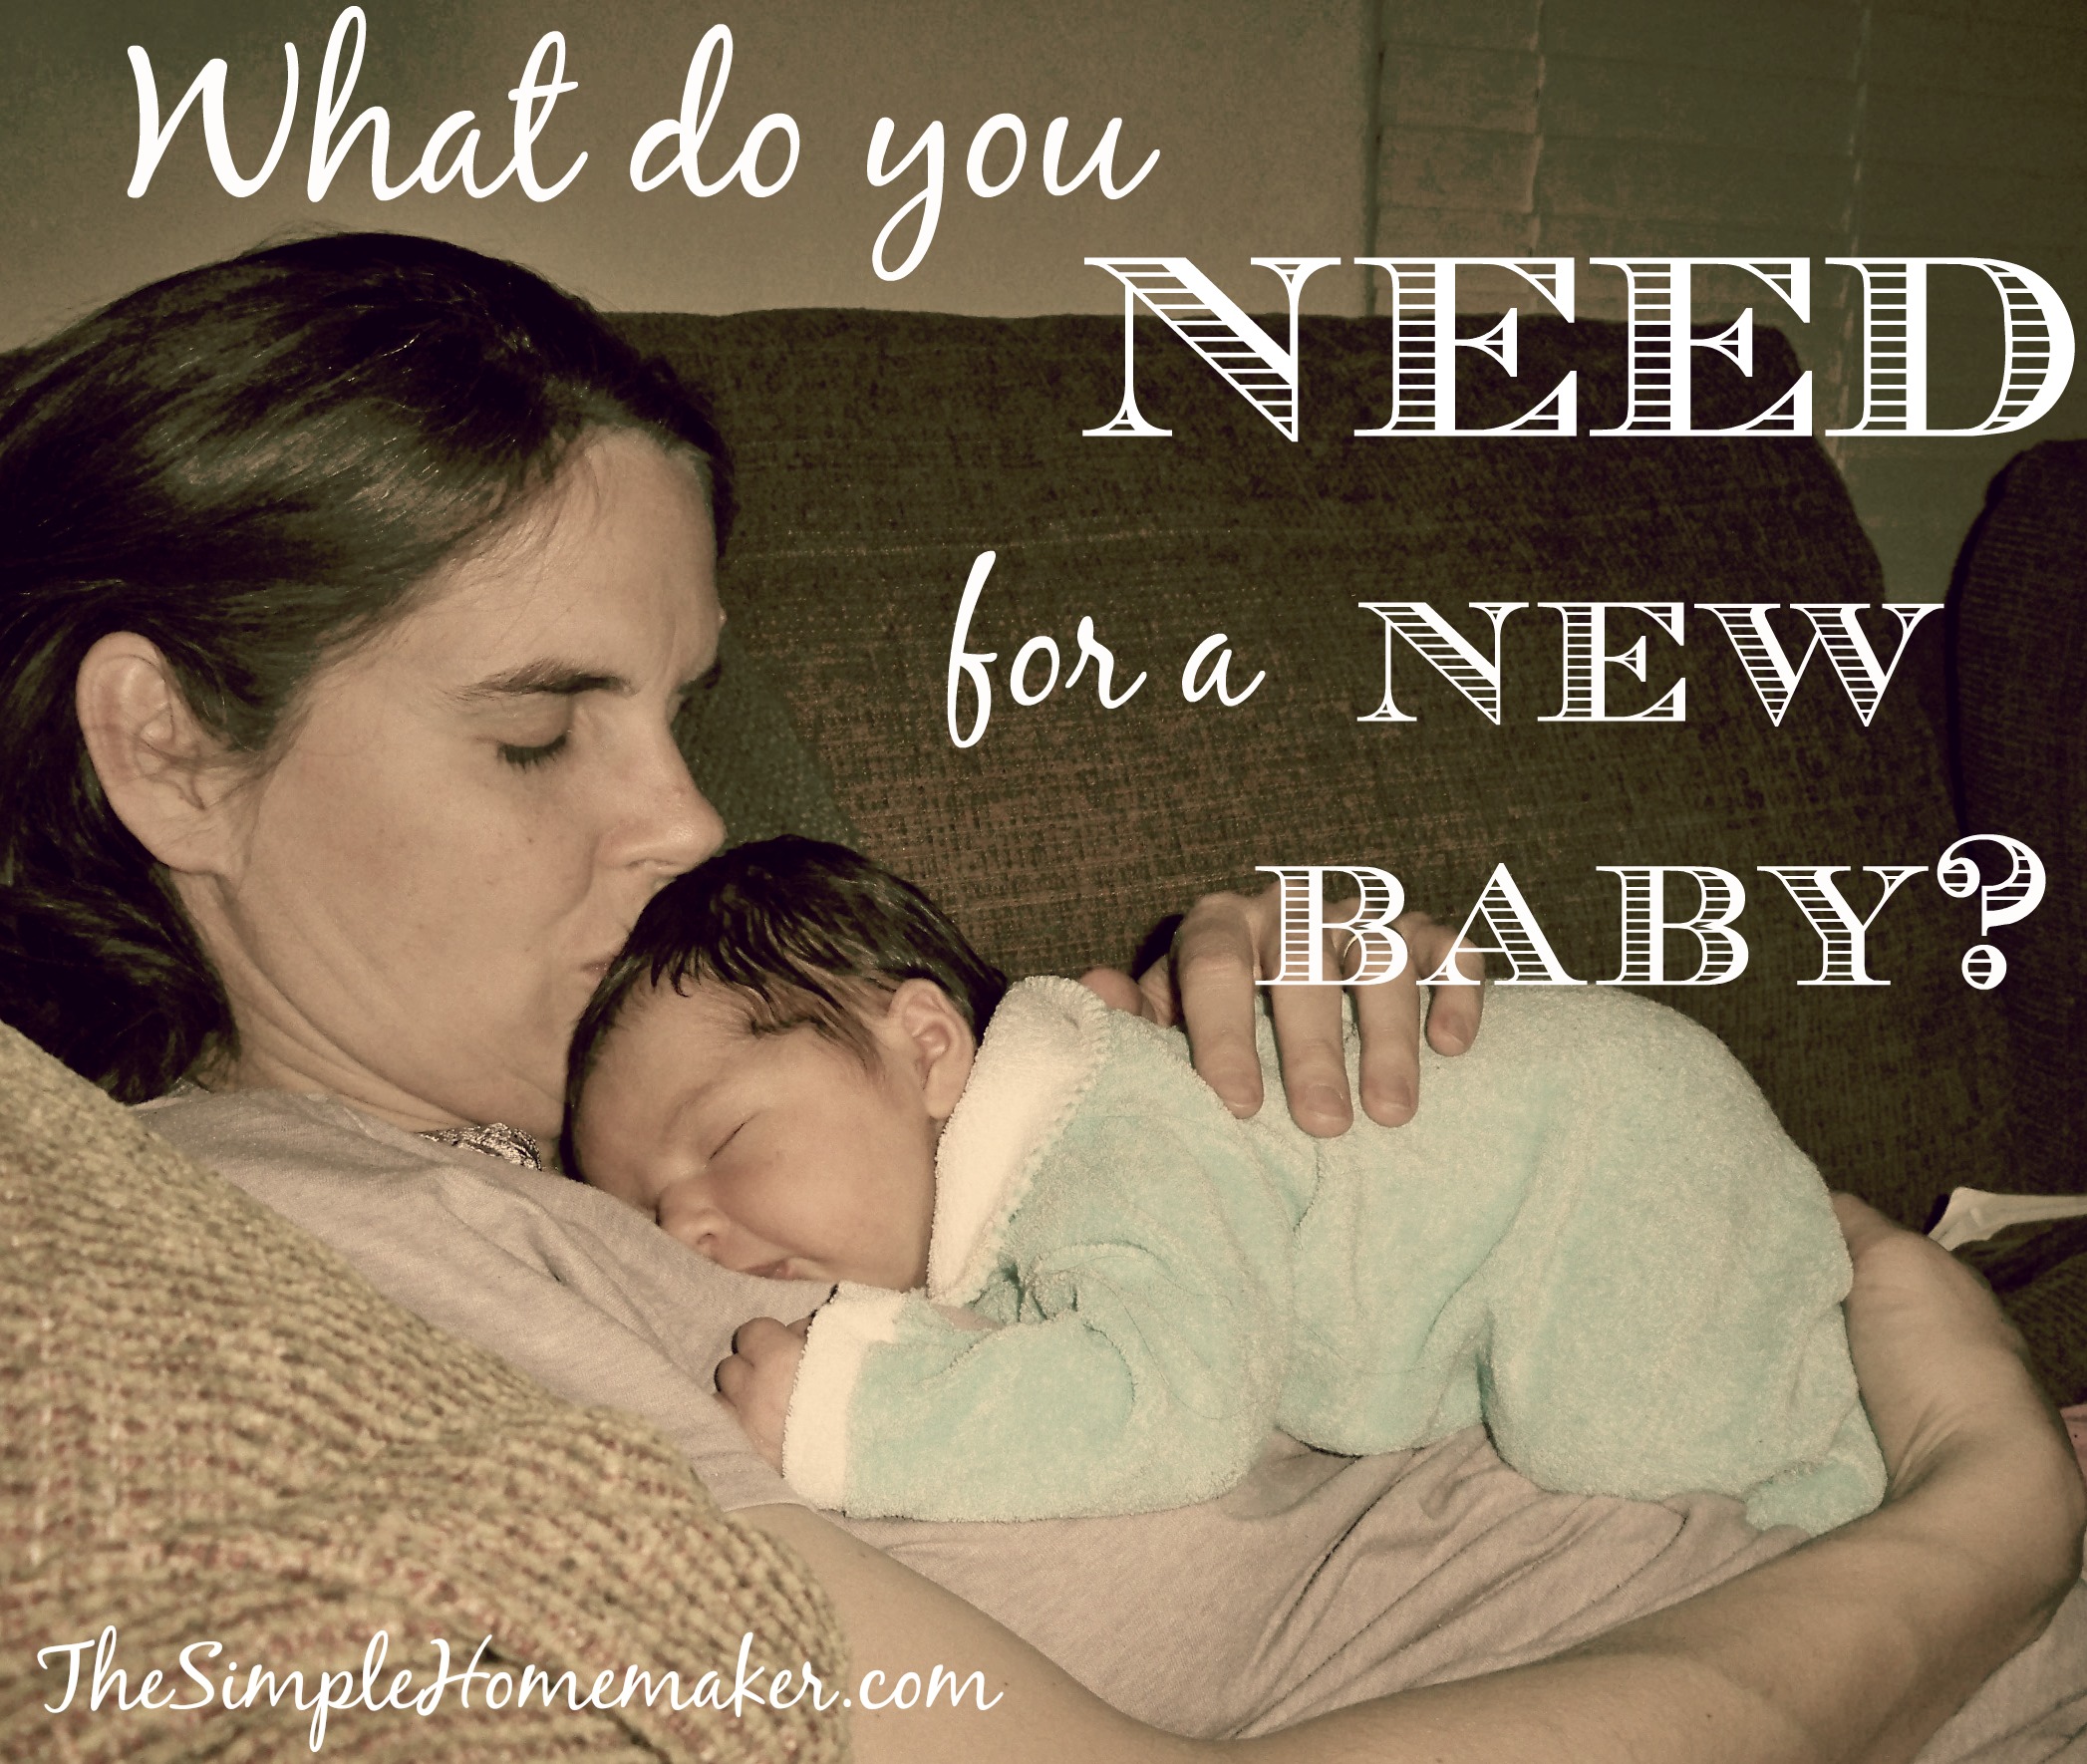 What do you NEED for a new baby...besides the ability to survive on 30-second increments of sleep?